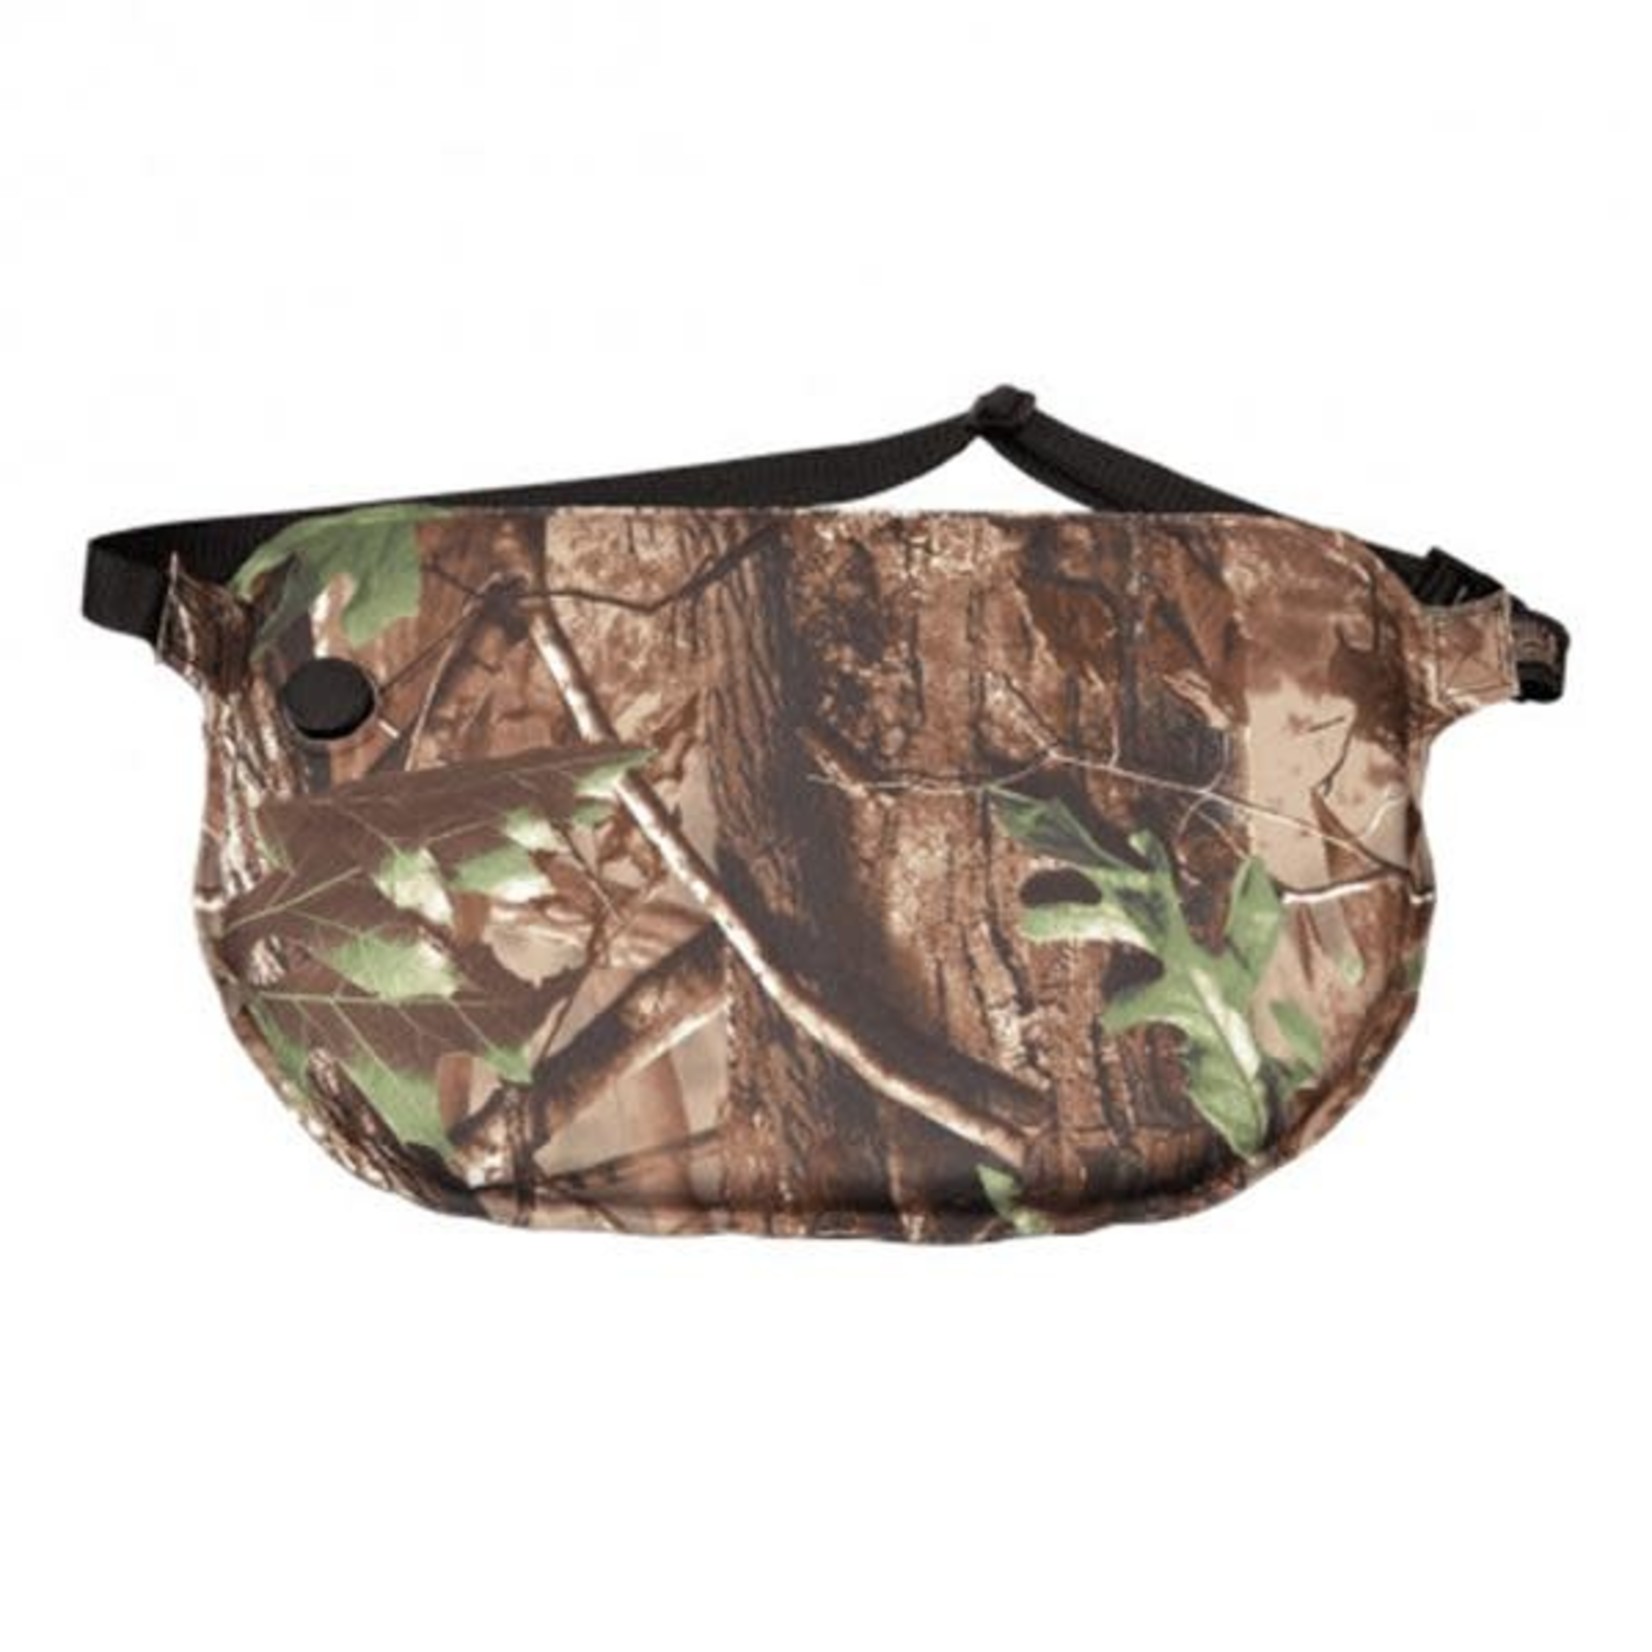 HUNTER SPECIALTIES Coussin Bunsaver Hunters Specialties Camouflage